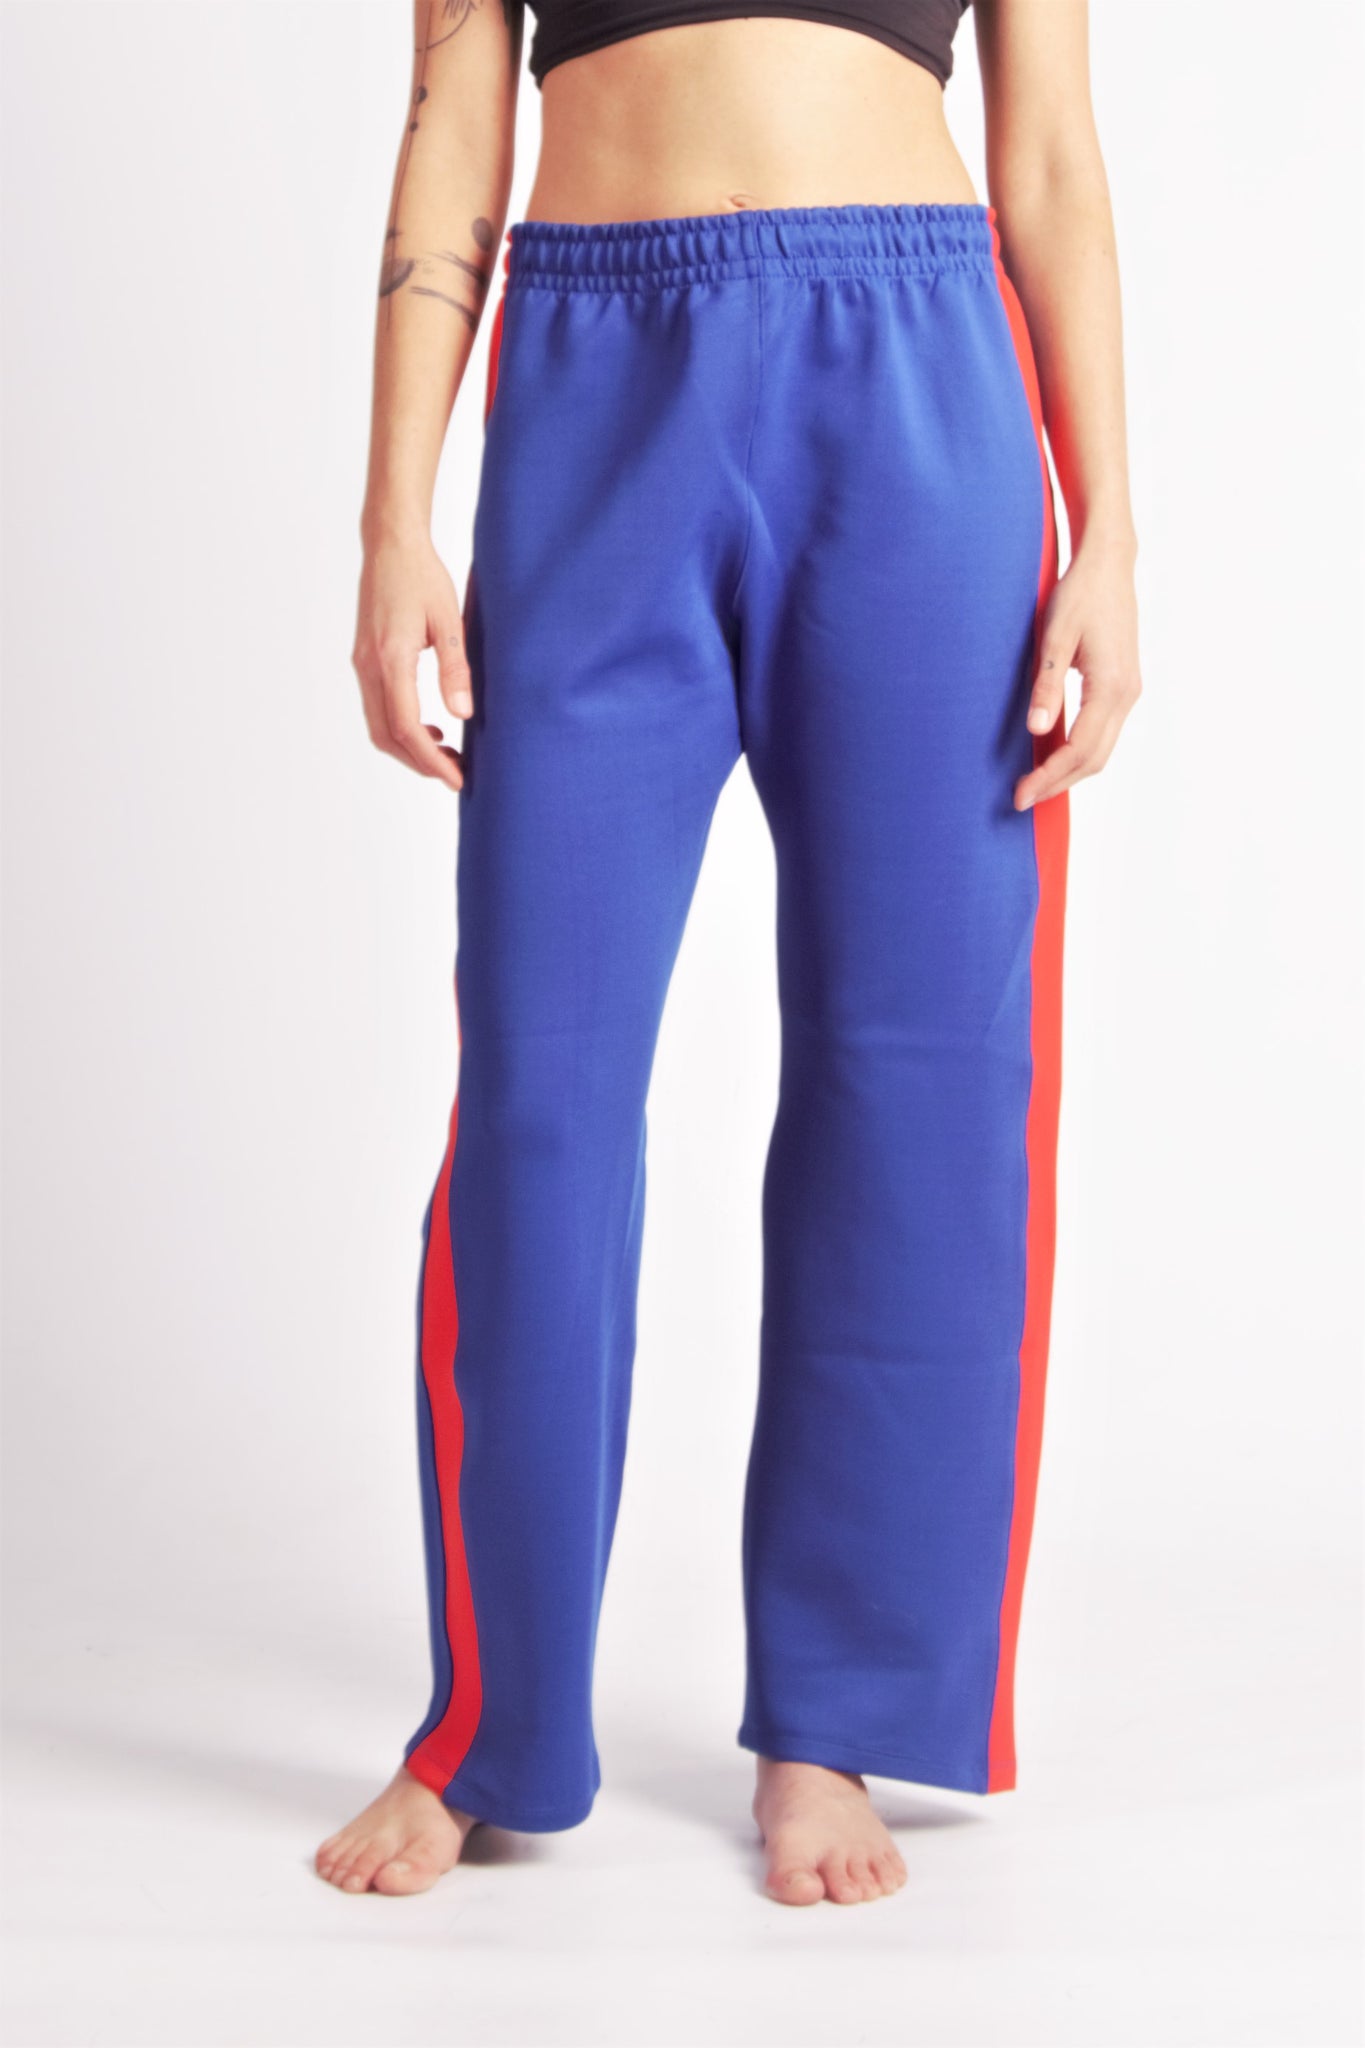 Flying Contemporary Dance Pants - Azul & Mostaza